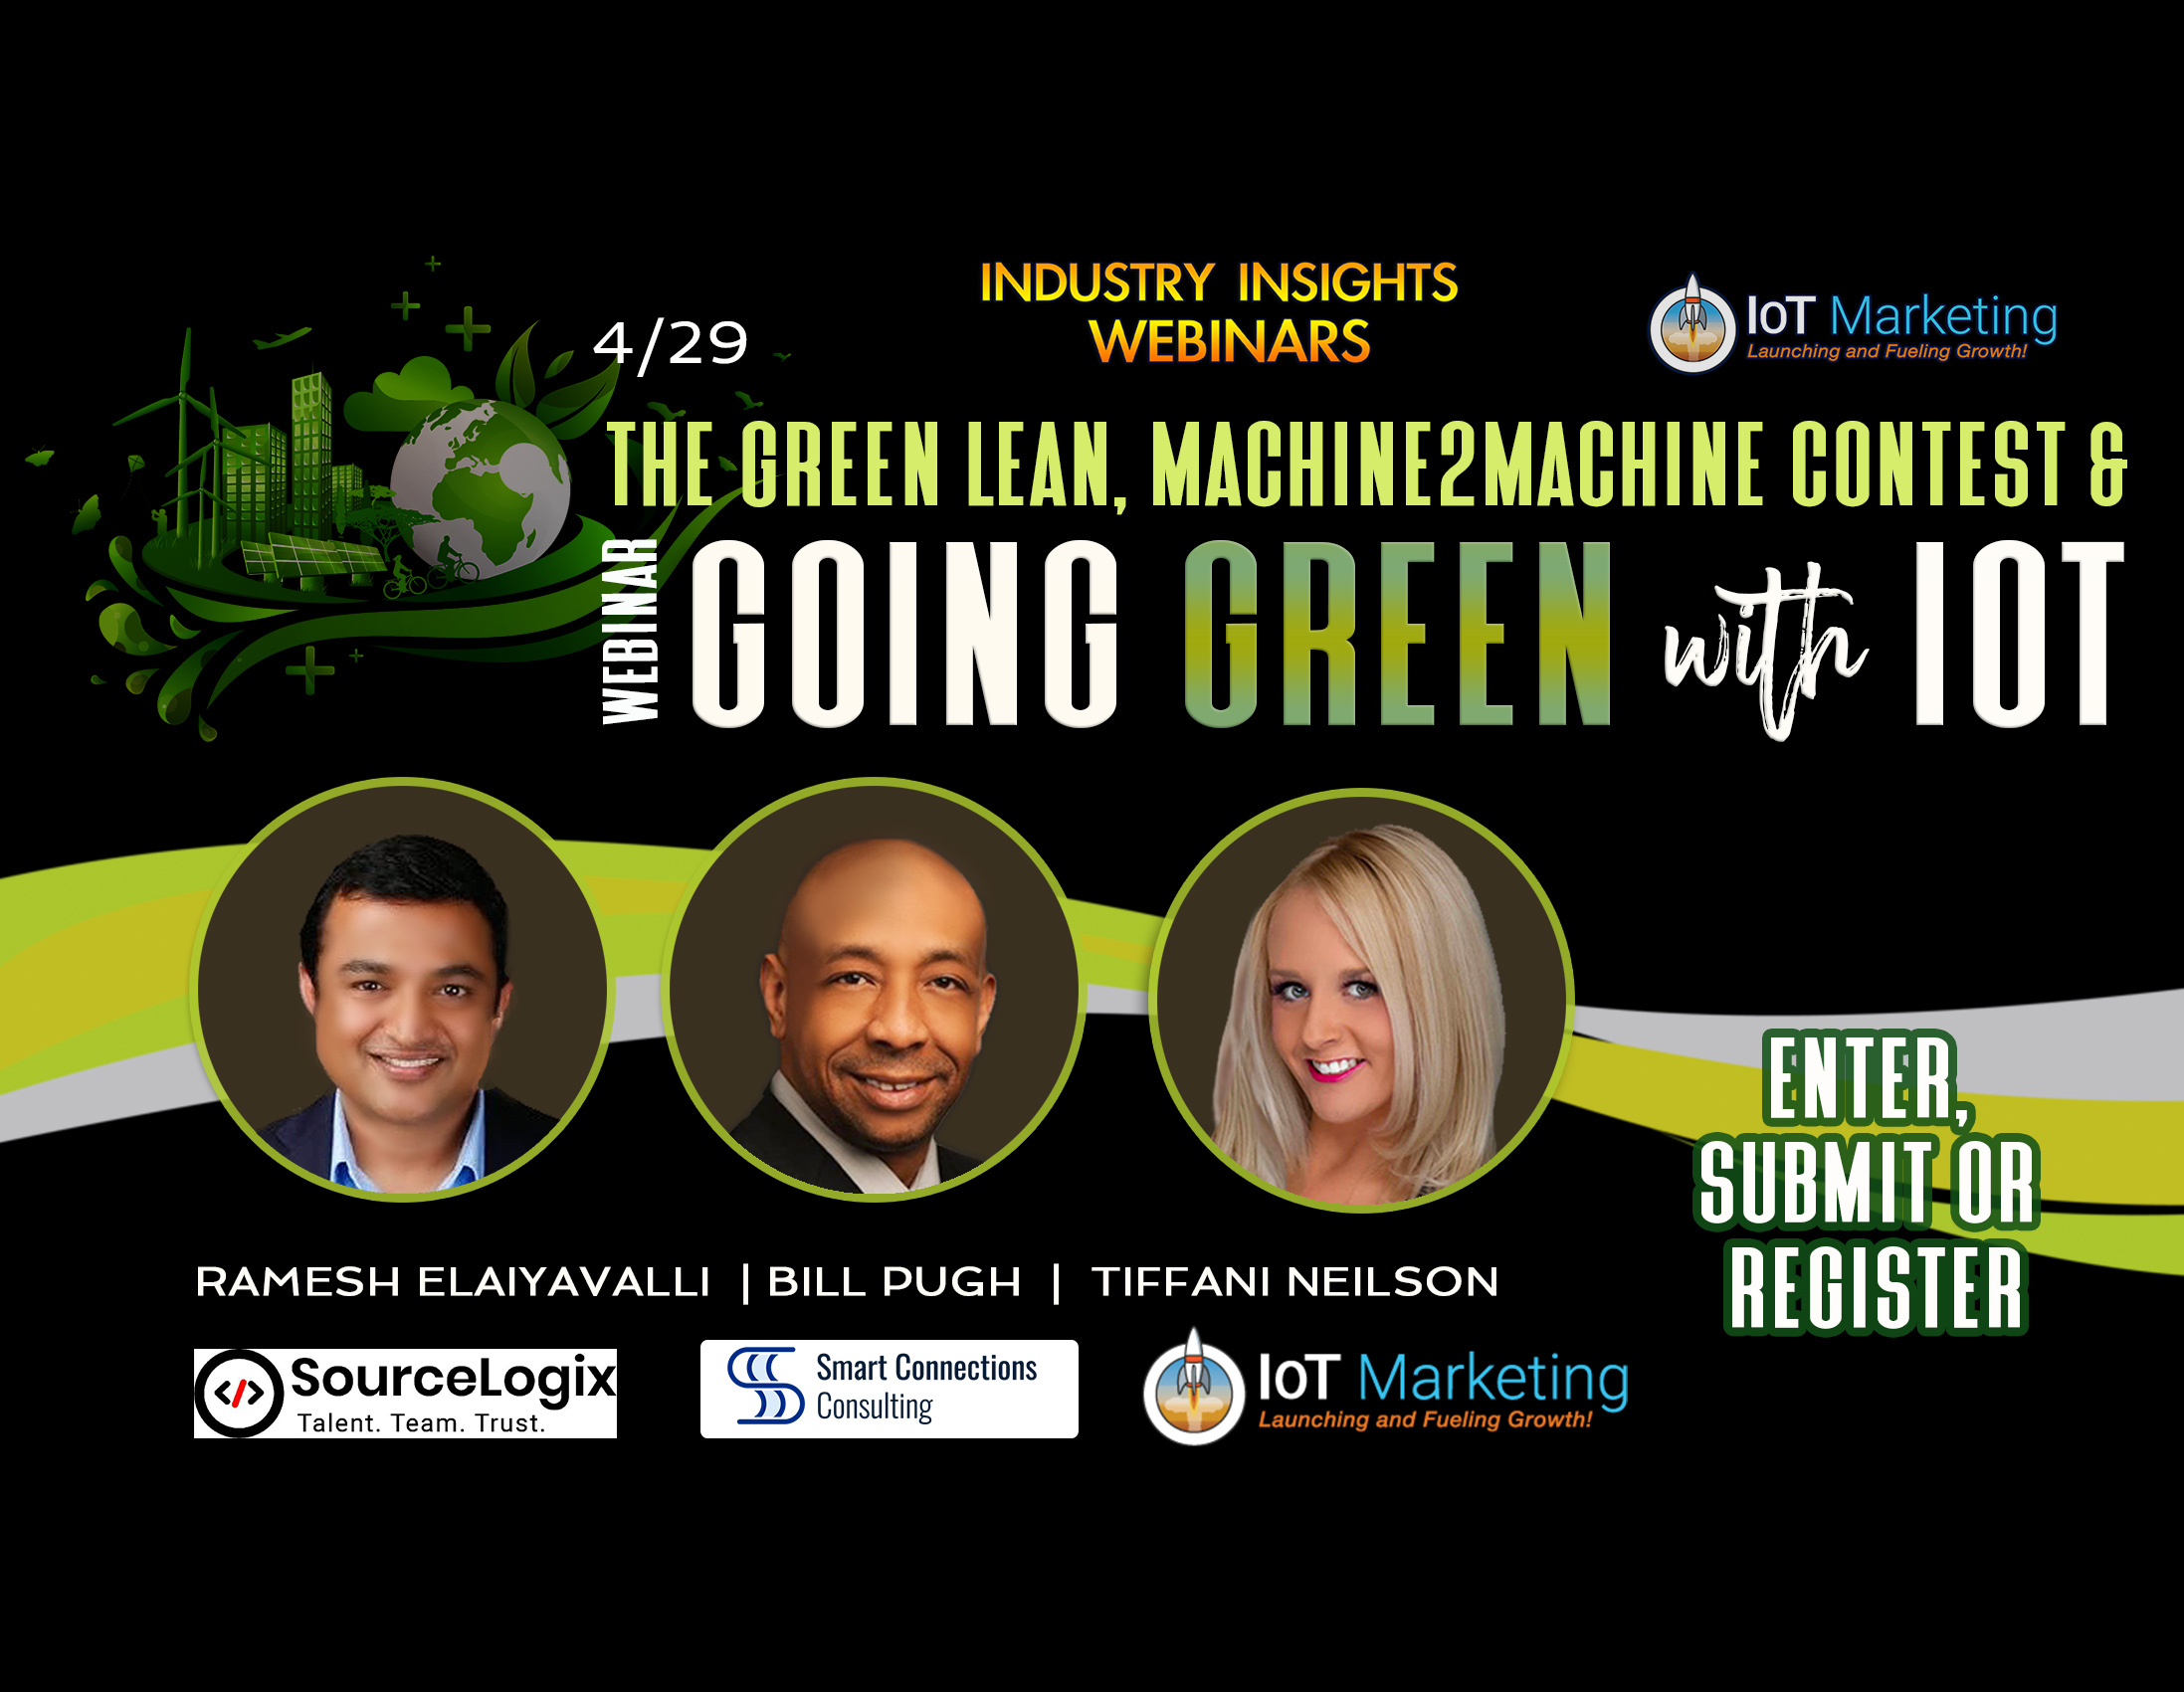 Going Green with IoT Webinar and Contest, Austin, Texas, United States